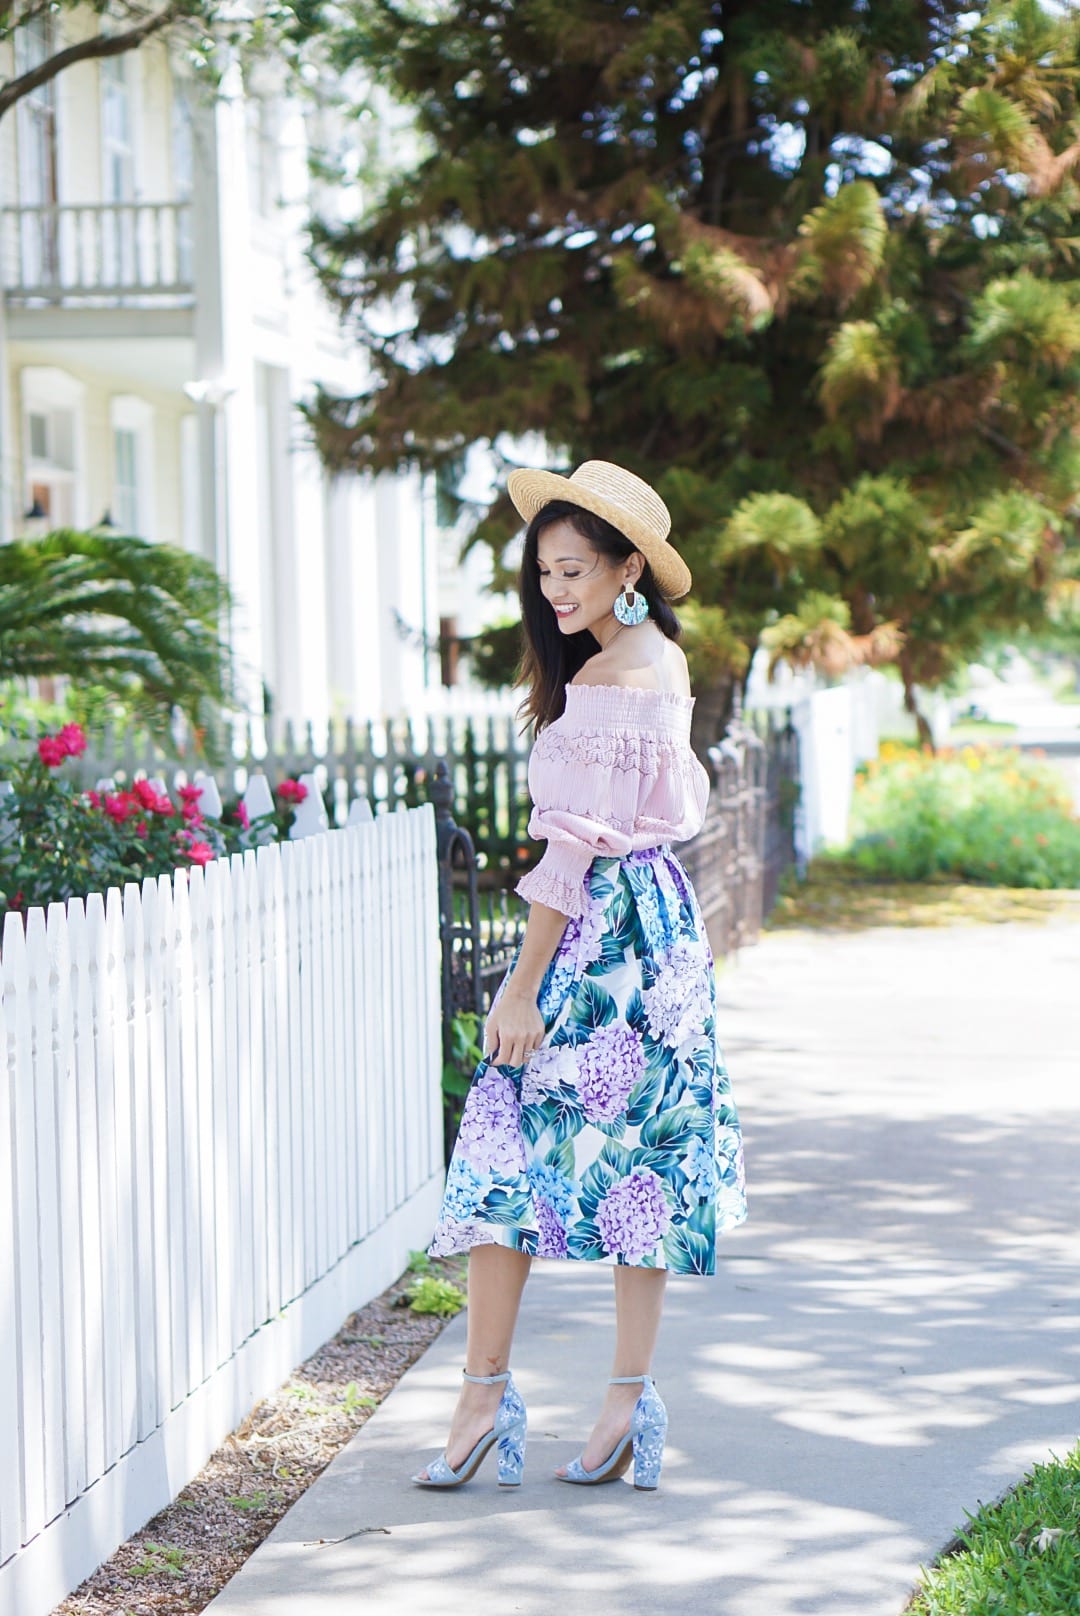 hydrangea skirt, floral skirt, Sunday best, #summerstyle, #sundaybrunchoutfit, #kendrascott, off the shoulder, #mothersday, Mother's Day outfit, straw bag, embroidered block heels, Mother's Day 